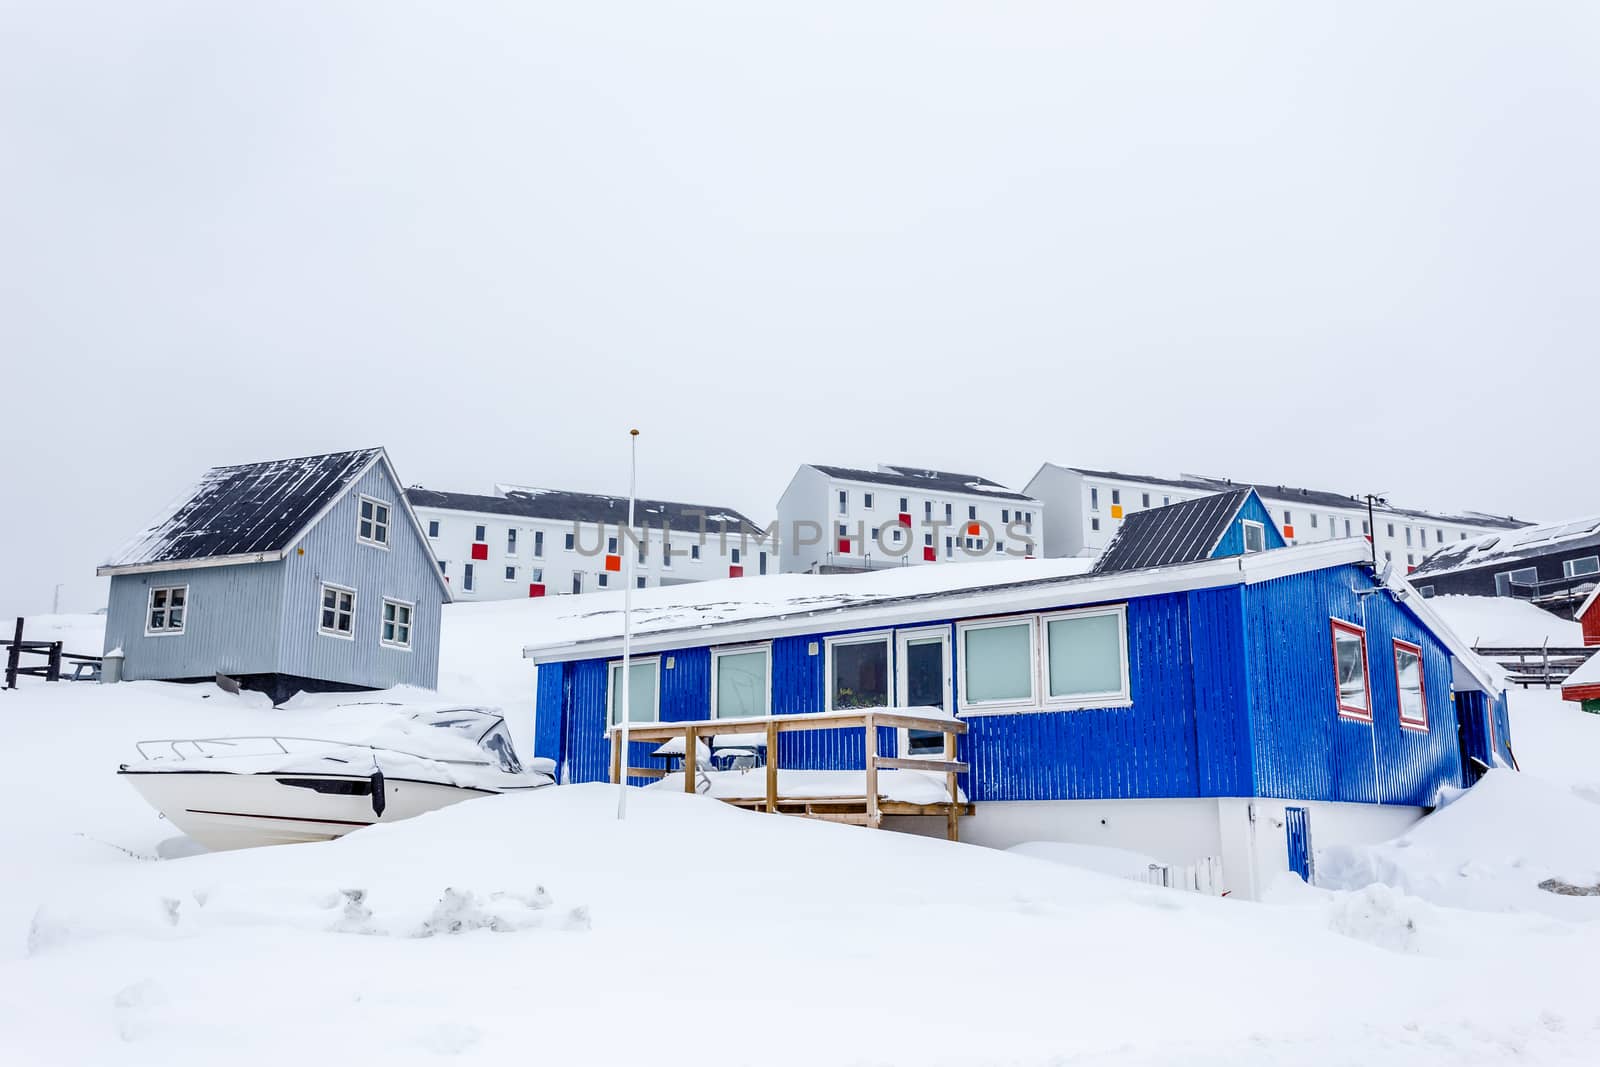 Greenlandic capital frozen buildings and streets full of snow,Nuuk, Greenland